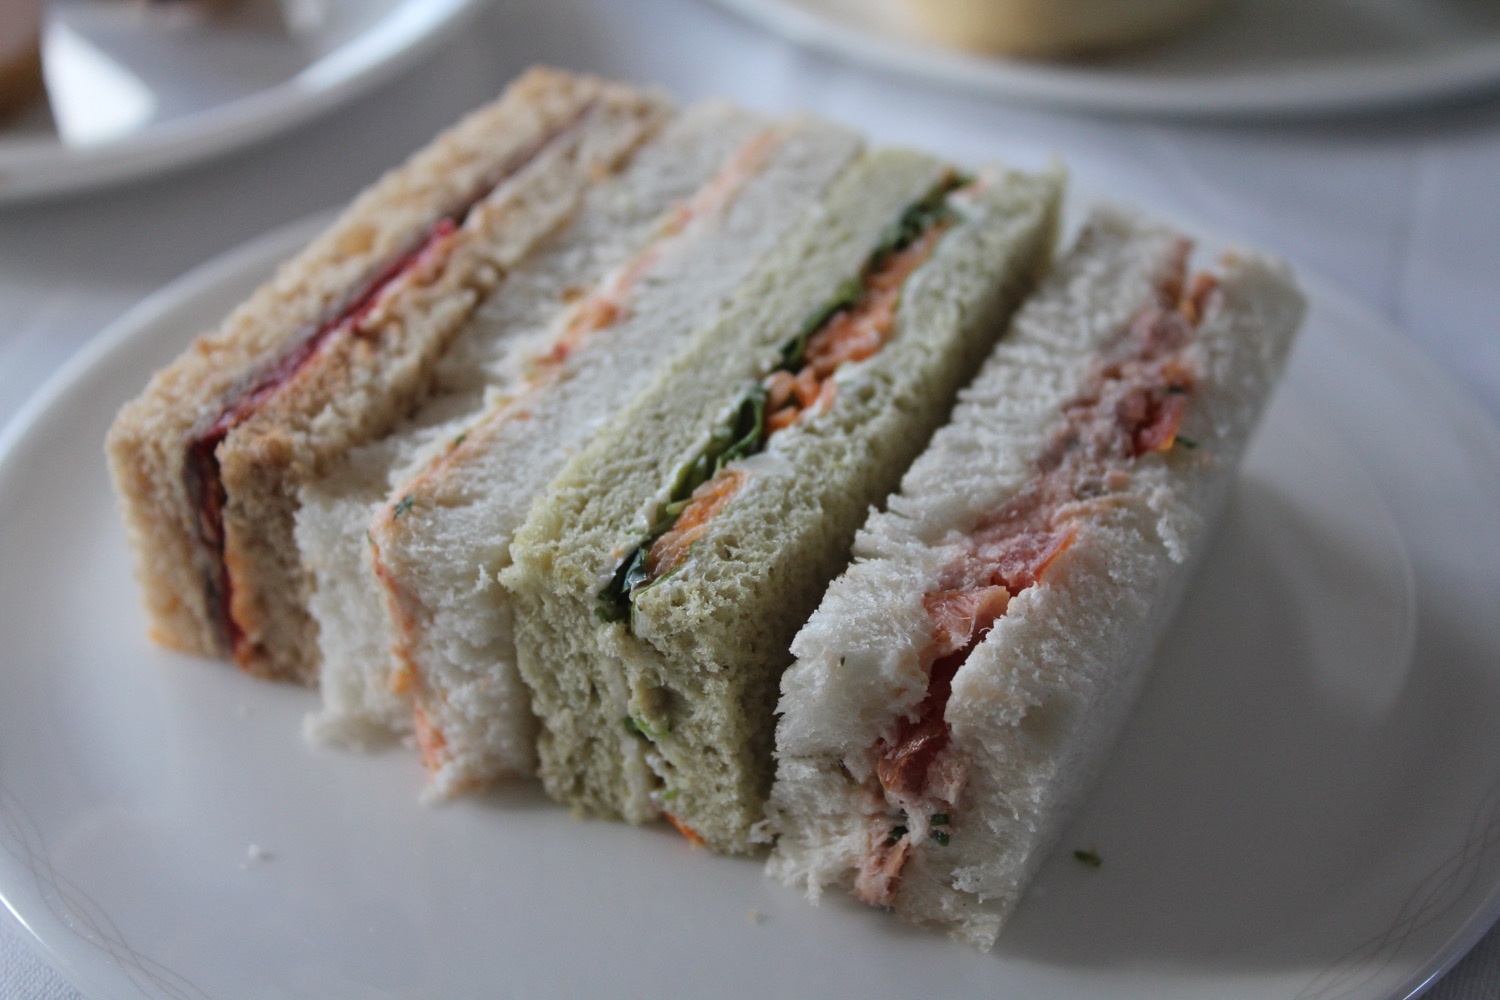 a group of sandwiches on a plate